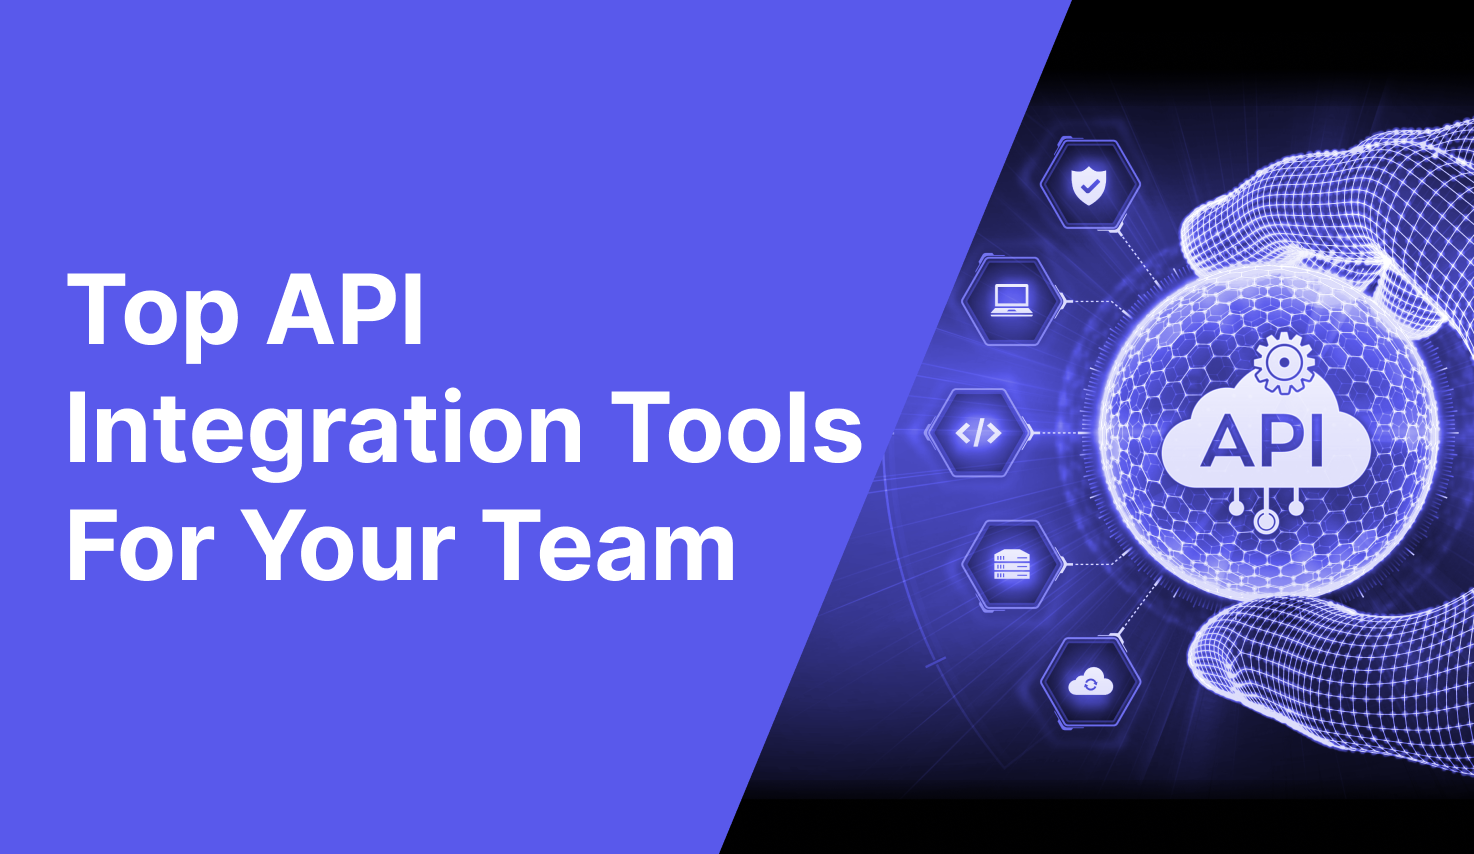 Top API Integration Tools for your team Featured Image